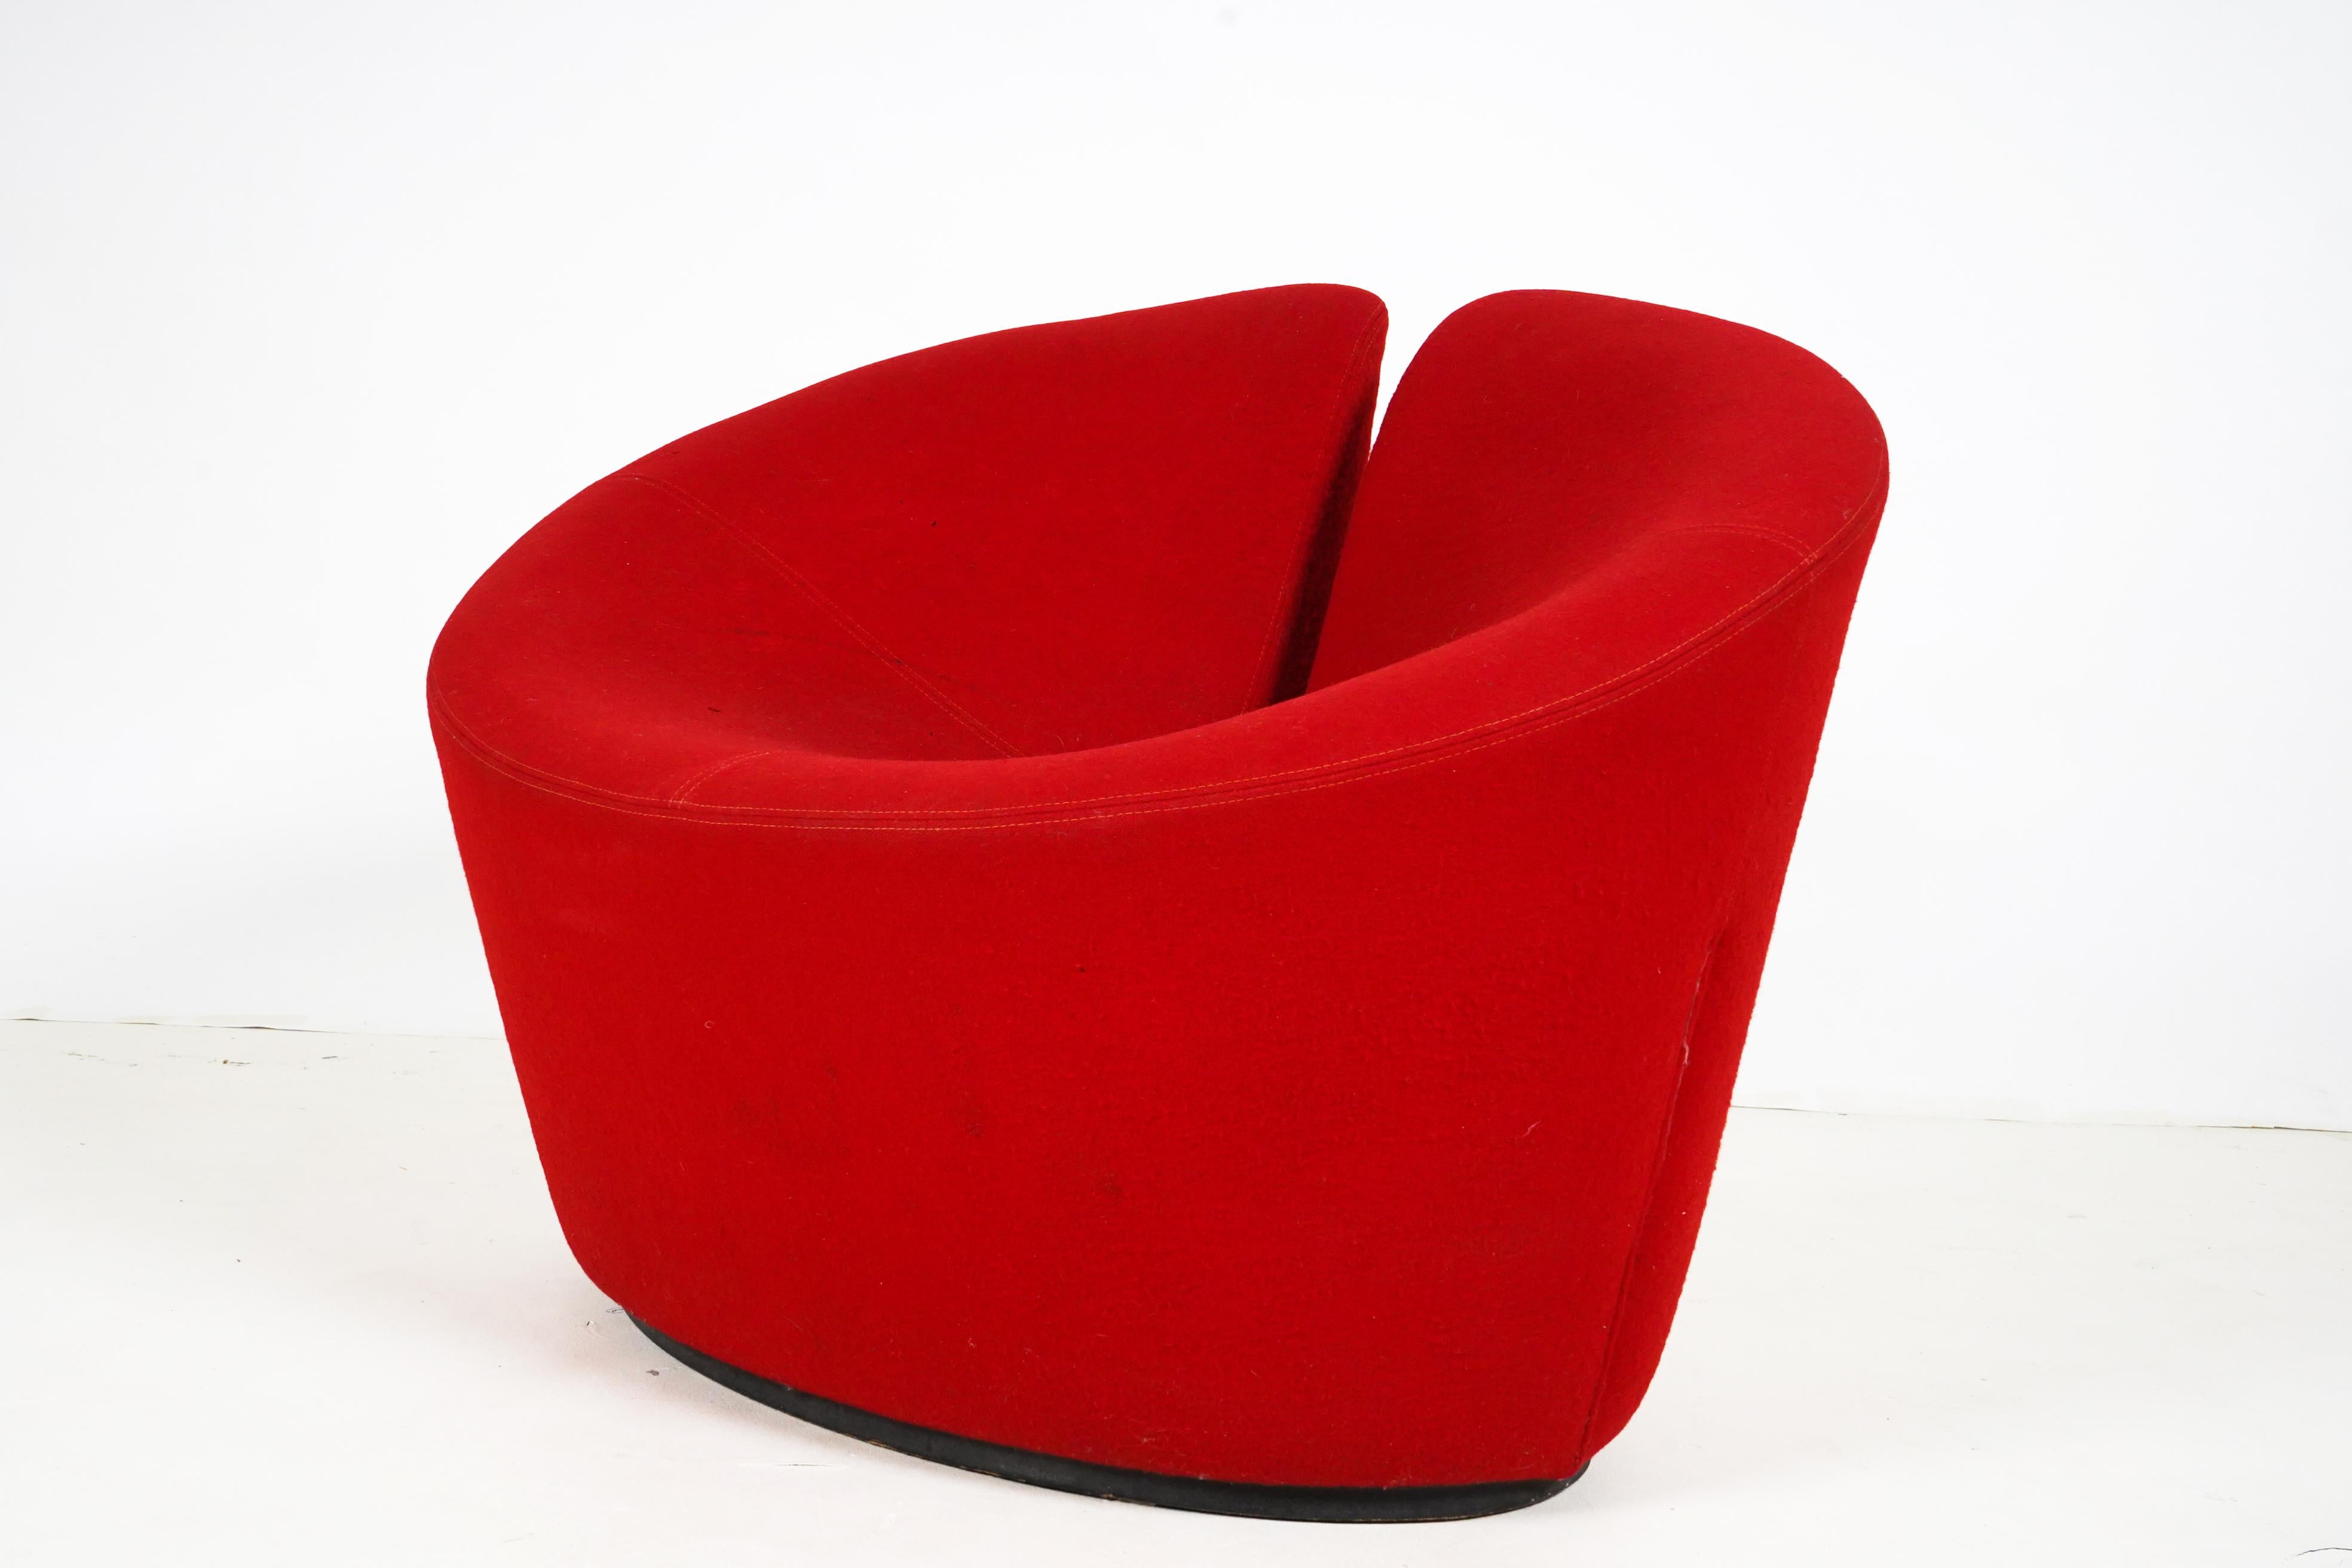 A vintage Danish True Love lounge chair in original red boucle fabric. This is a beautiful and incredibly comfortable eye-catcher by design group Globe Zero 4, from designers Flemming Busk and Stephan Hertzog. The chair is made from molded